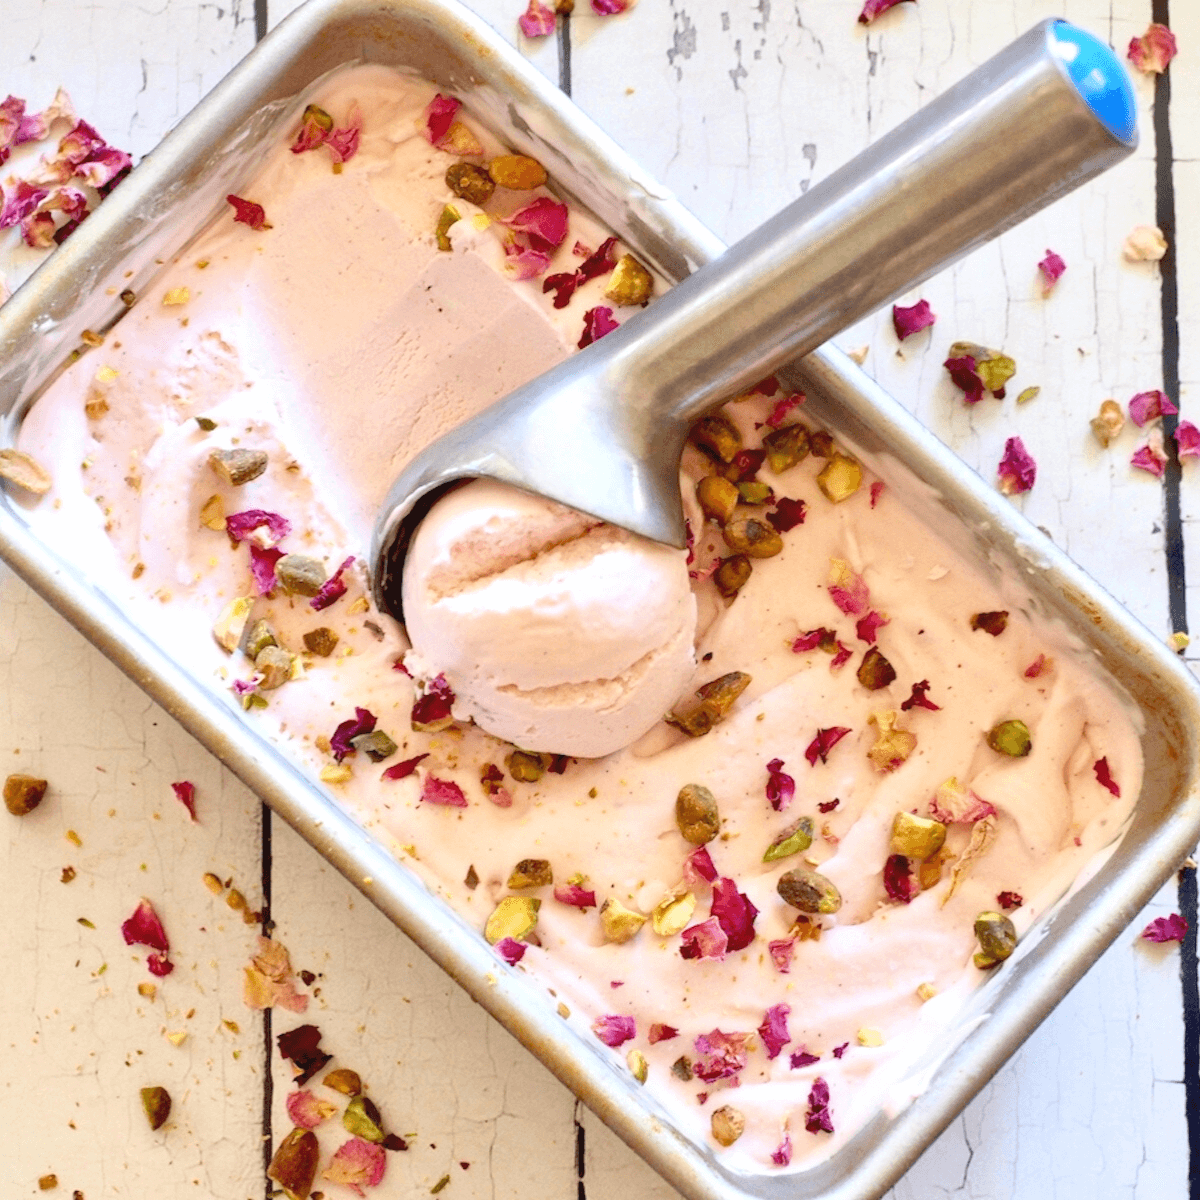 Rose No churn Ice cream square image with pan filled with pink ice cream topped with rose petals and pistachios.